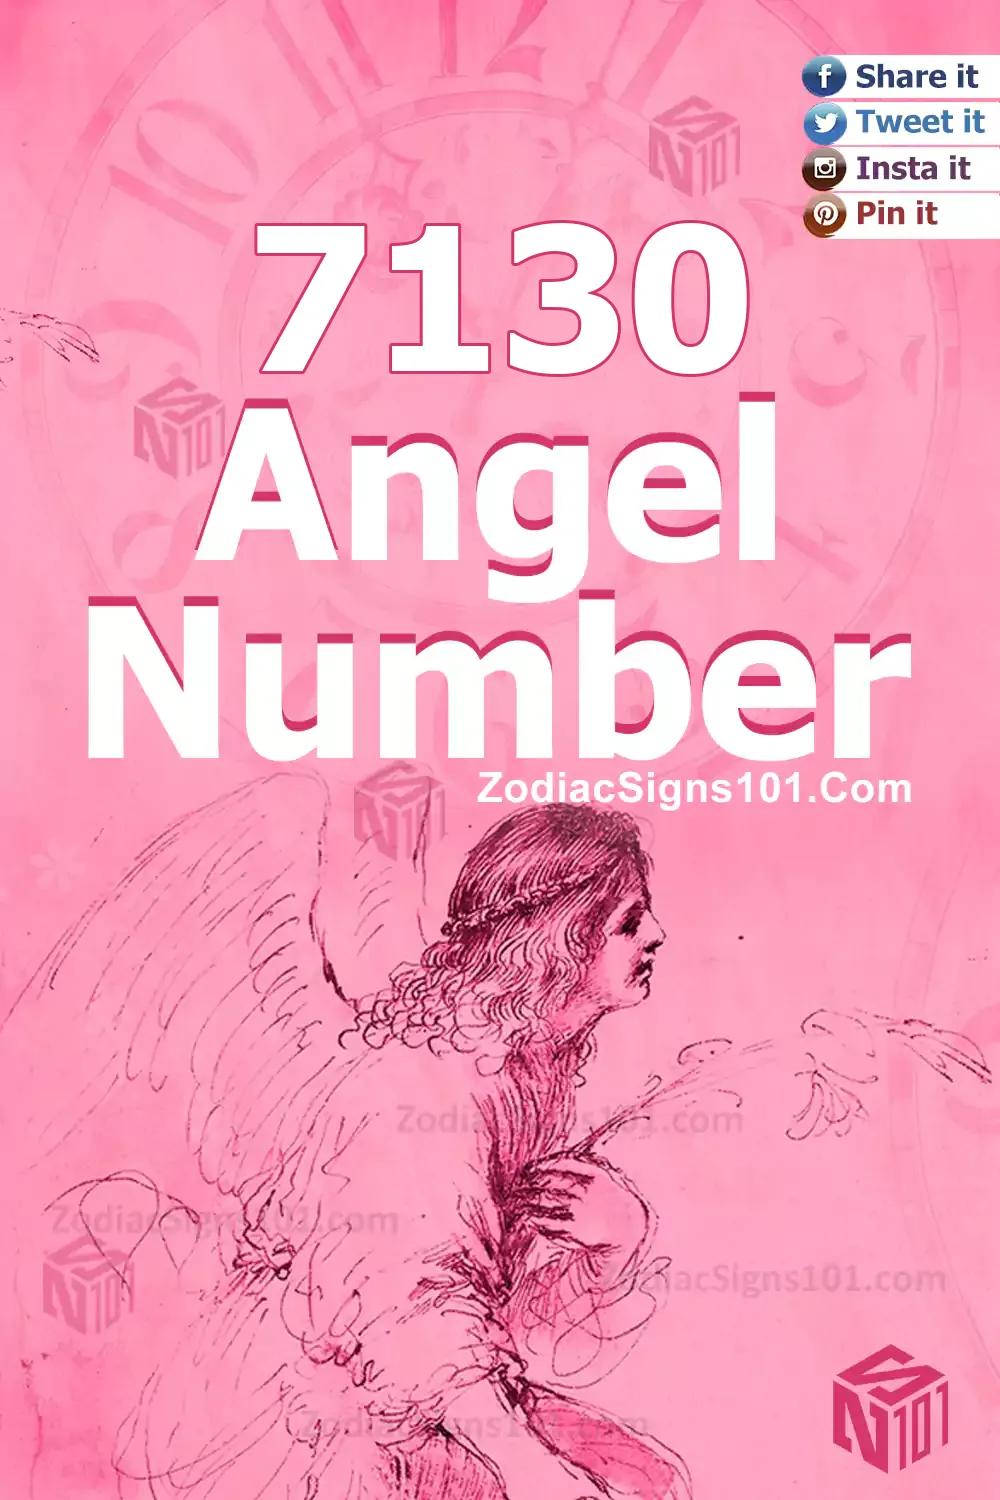 7130 Angel Number Meaning